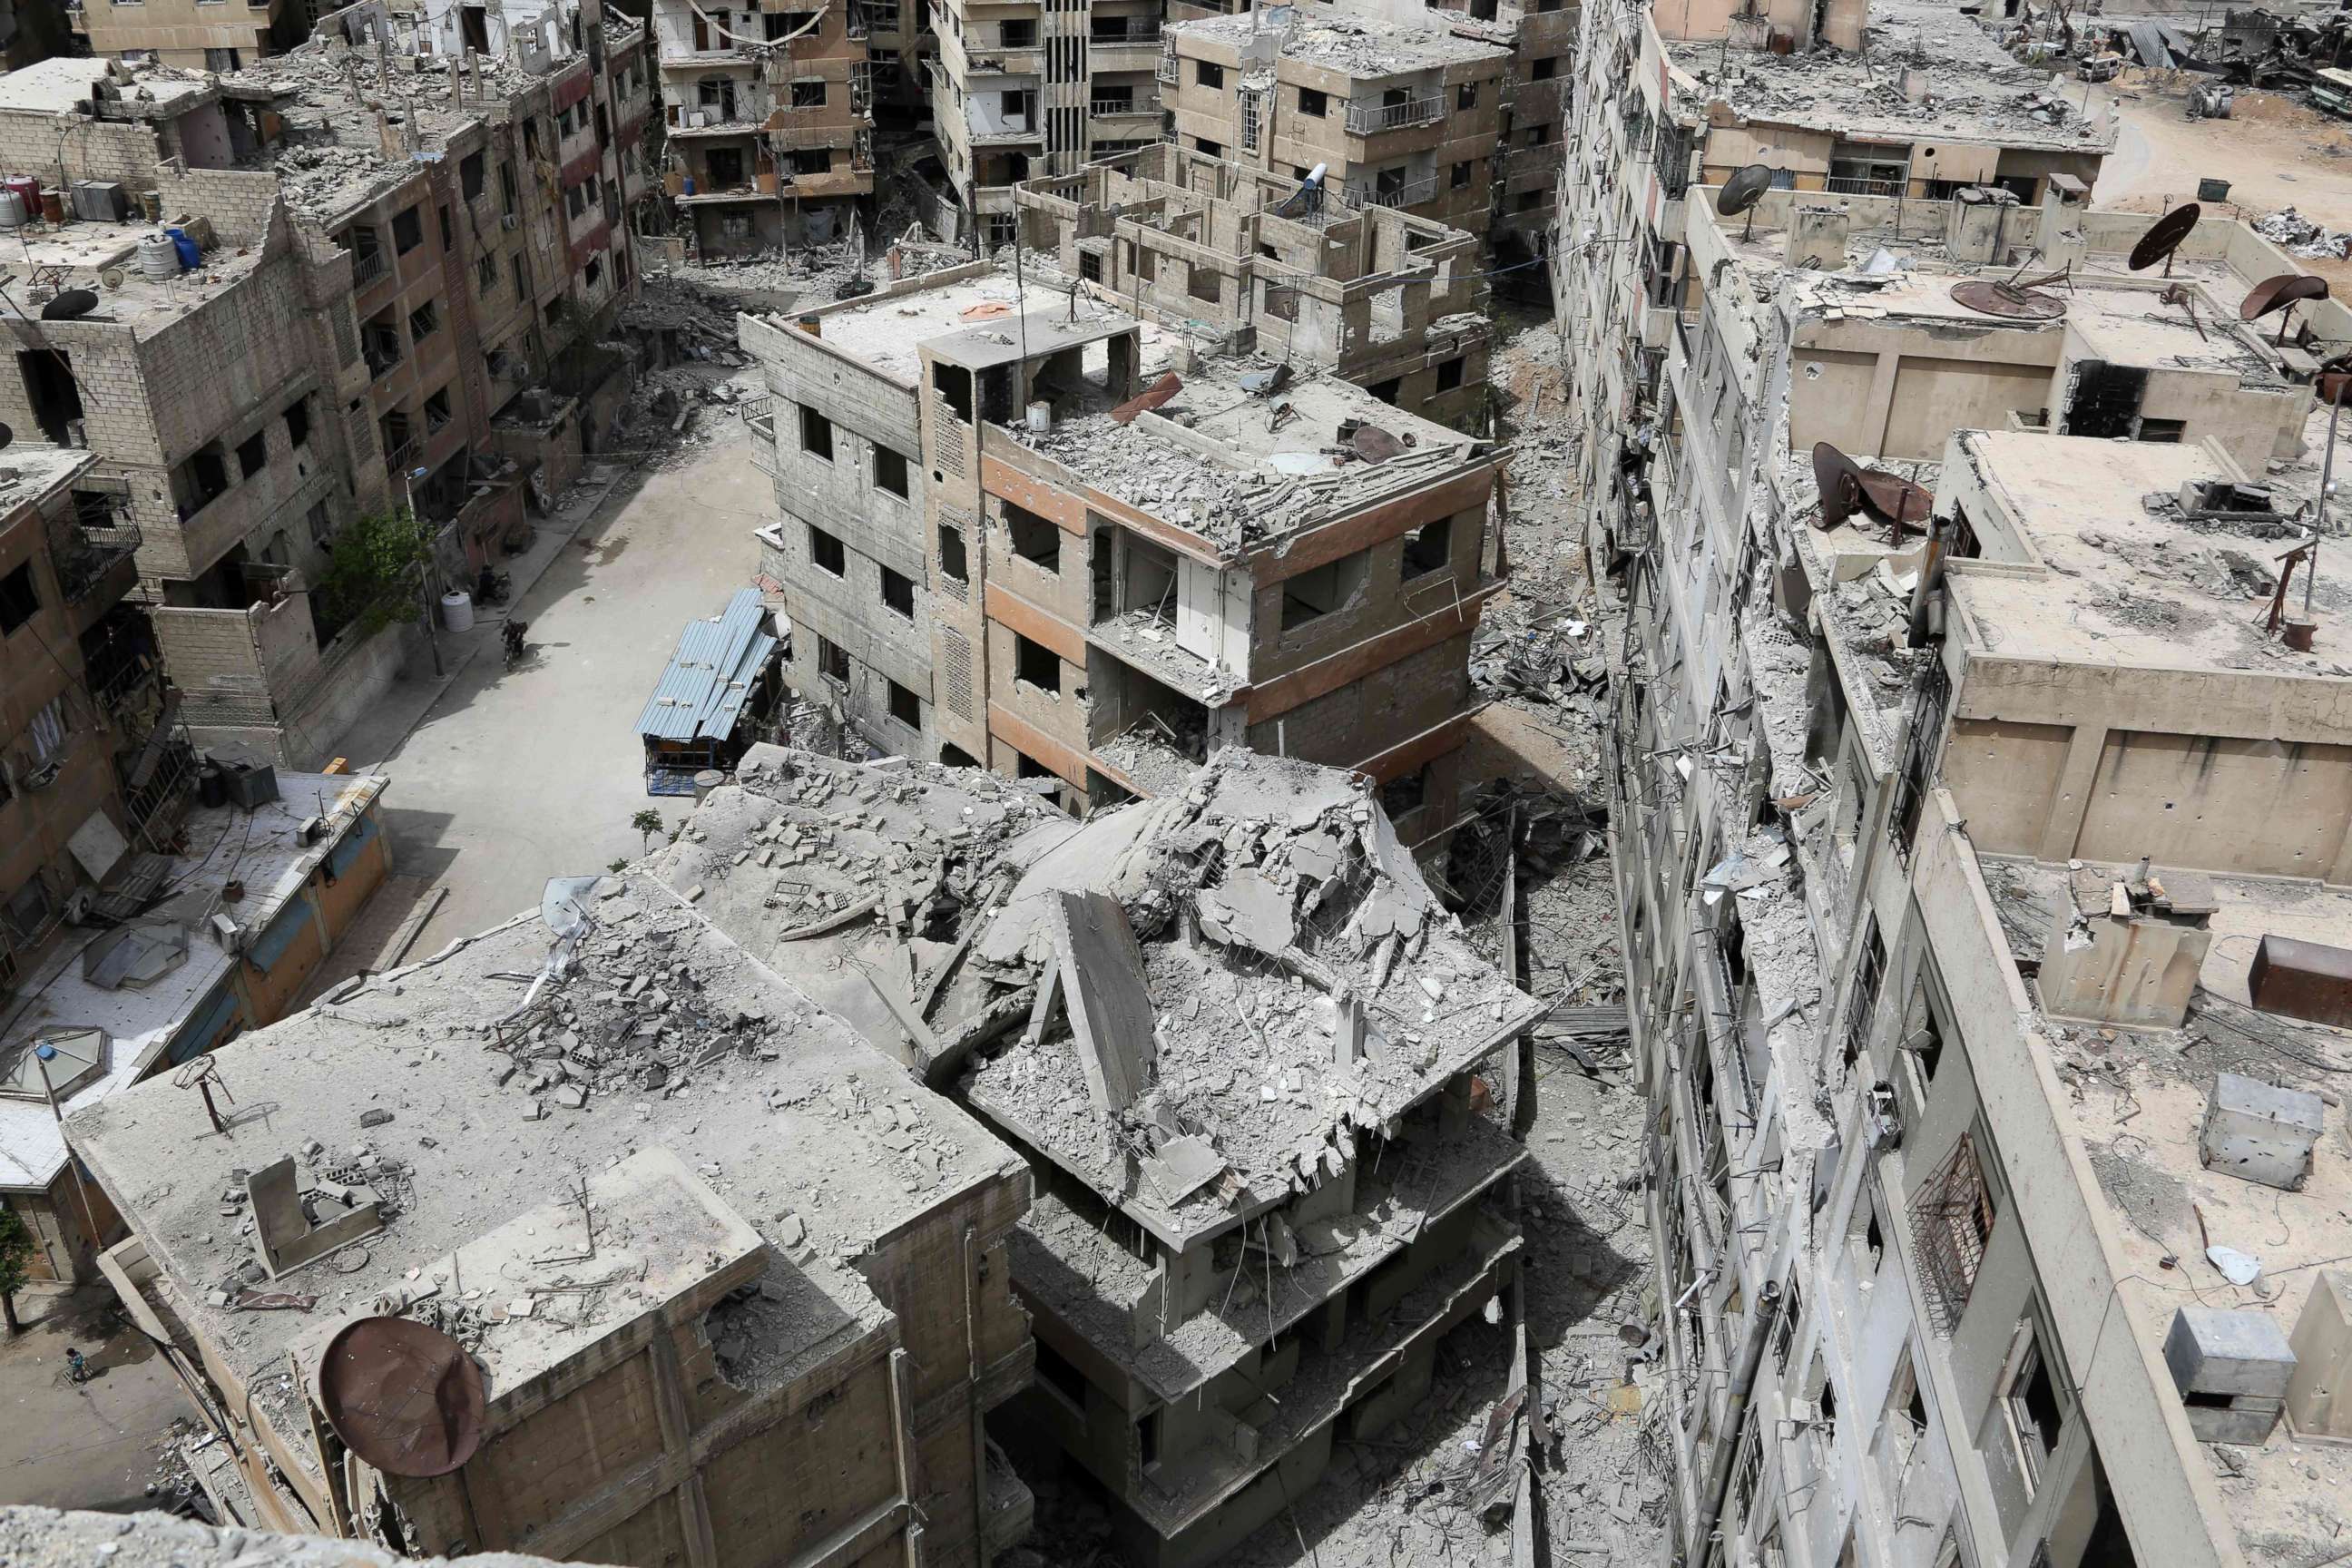 PHOTO: The former Syrian town of Douma on the outskirts of Damascus, April 17, 2018, after the Syrian army declared that all anti-regime forces have left Eastern Ghouta, following a blistering two month offensive on the rebel enclave. 
